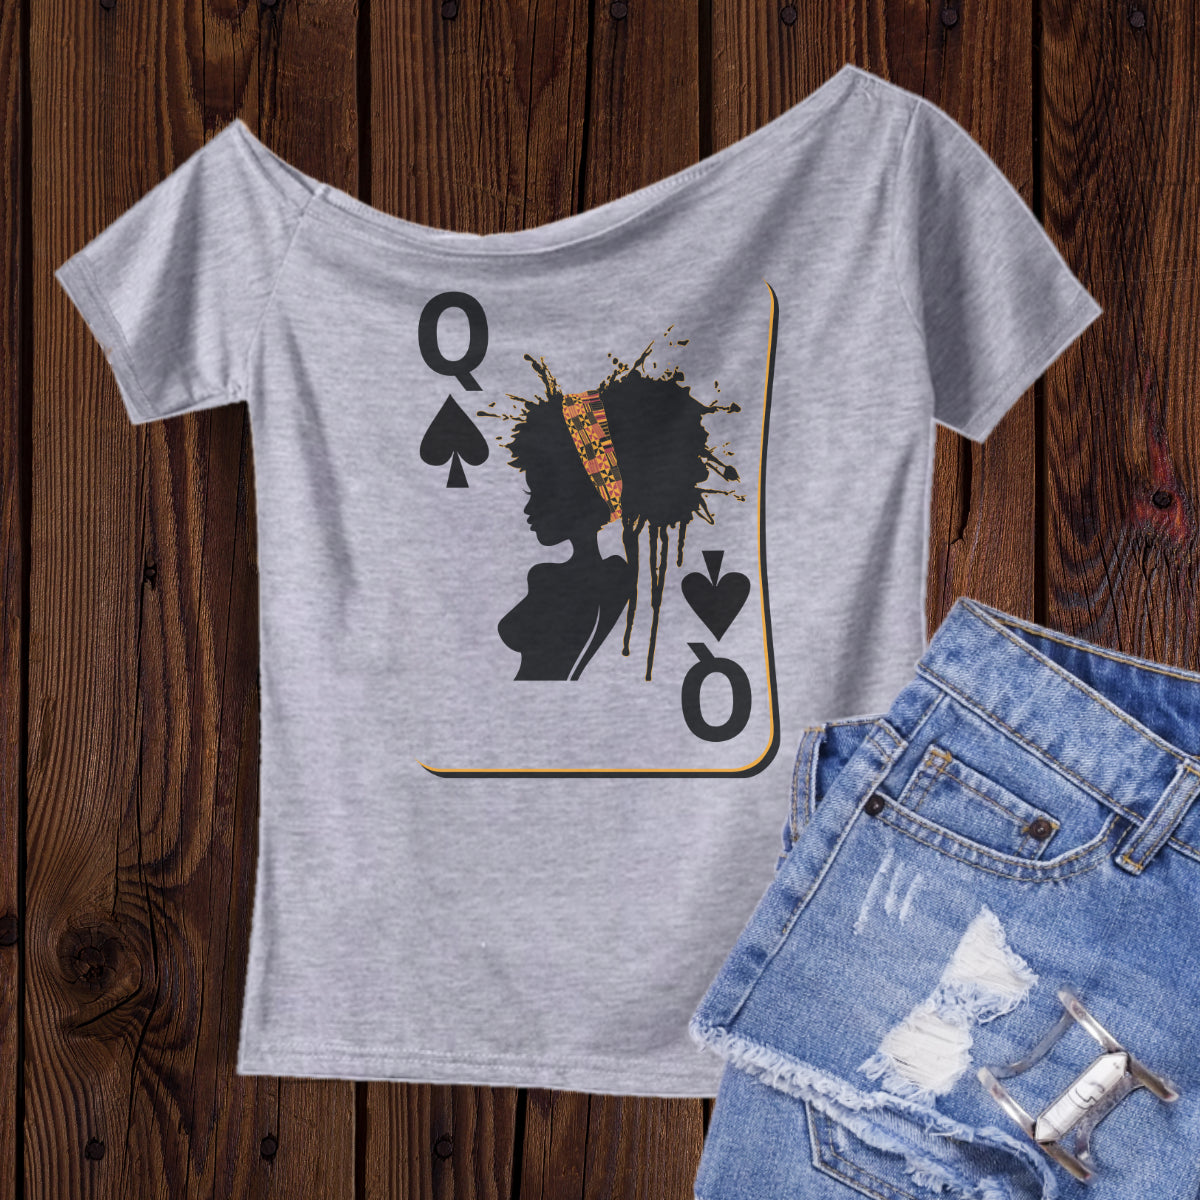 Queen of Spades - Off the shoulder tee Natural Hair Products